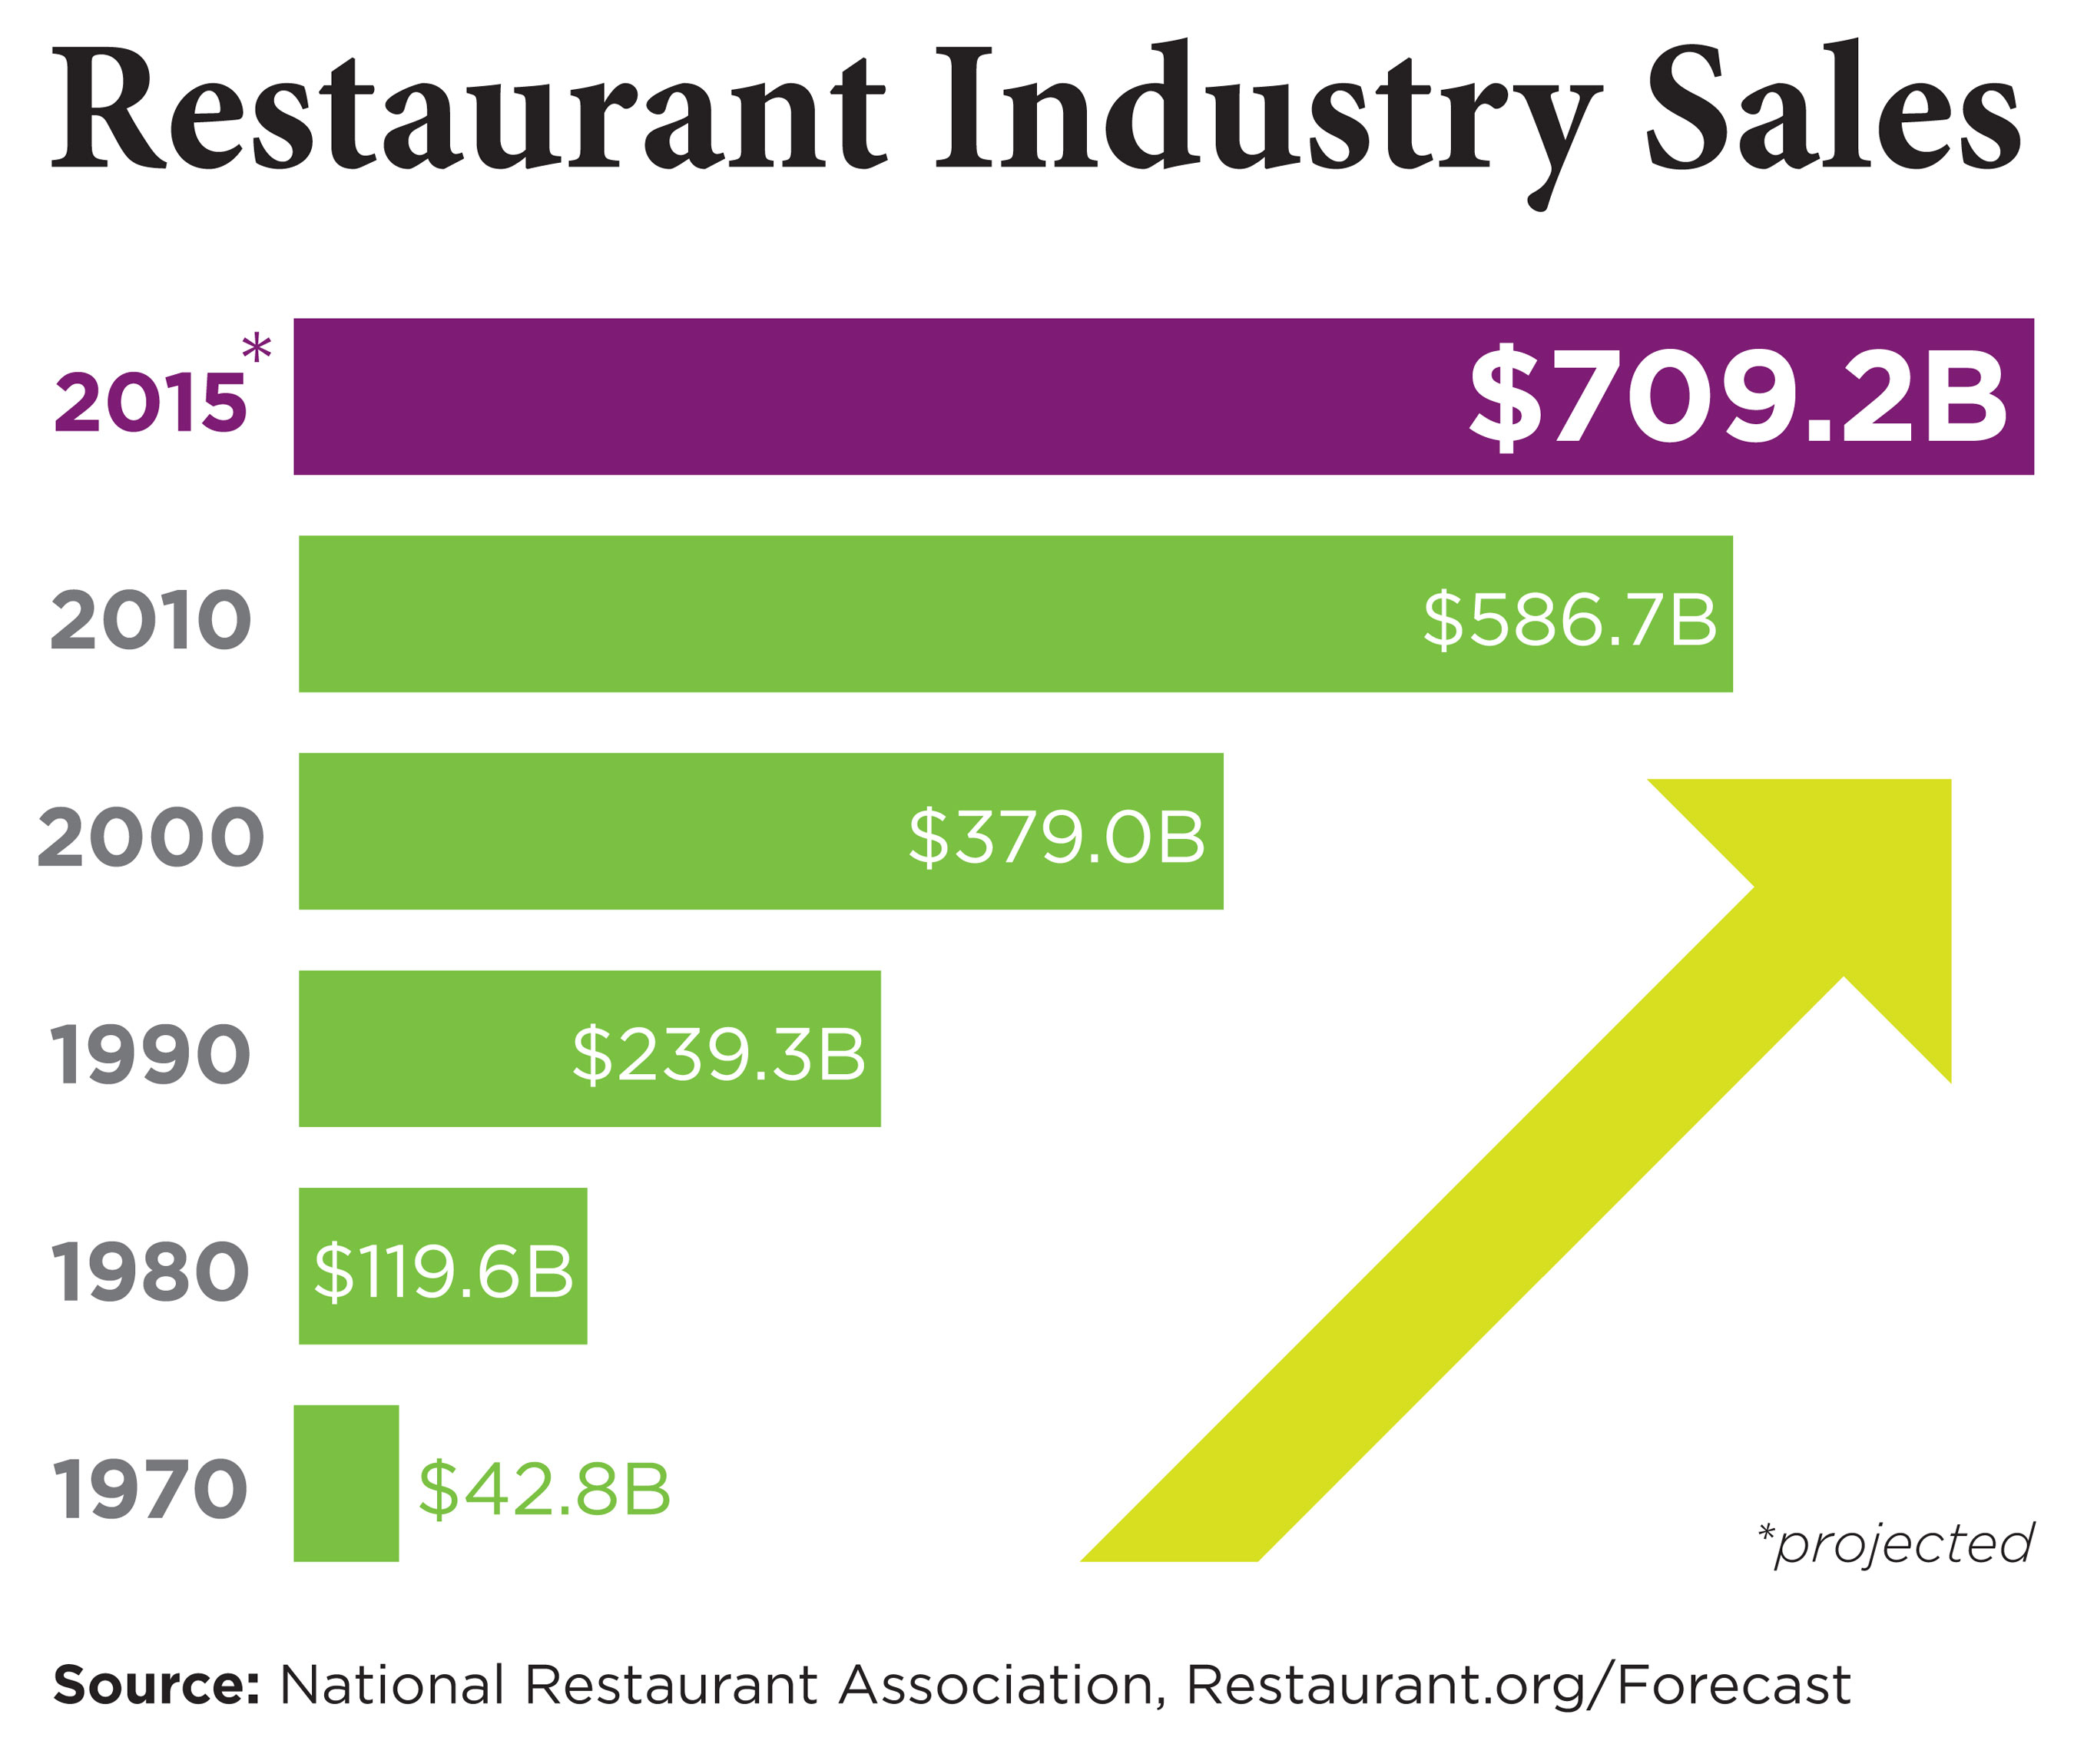 Restaurant Industry Enters 6th Consecutive Year of Growth